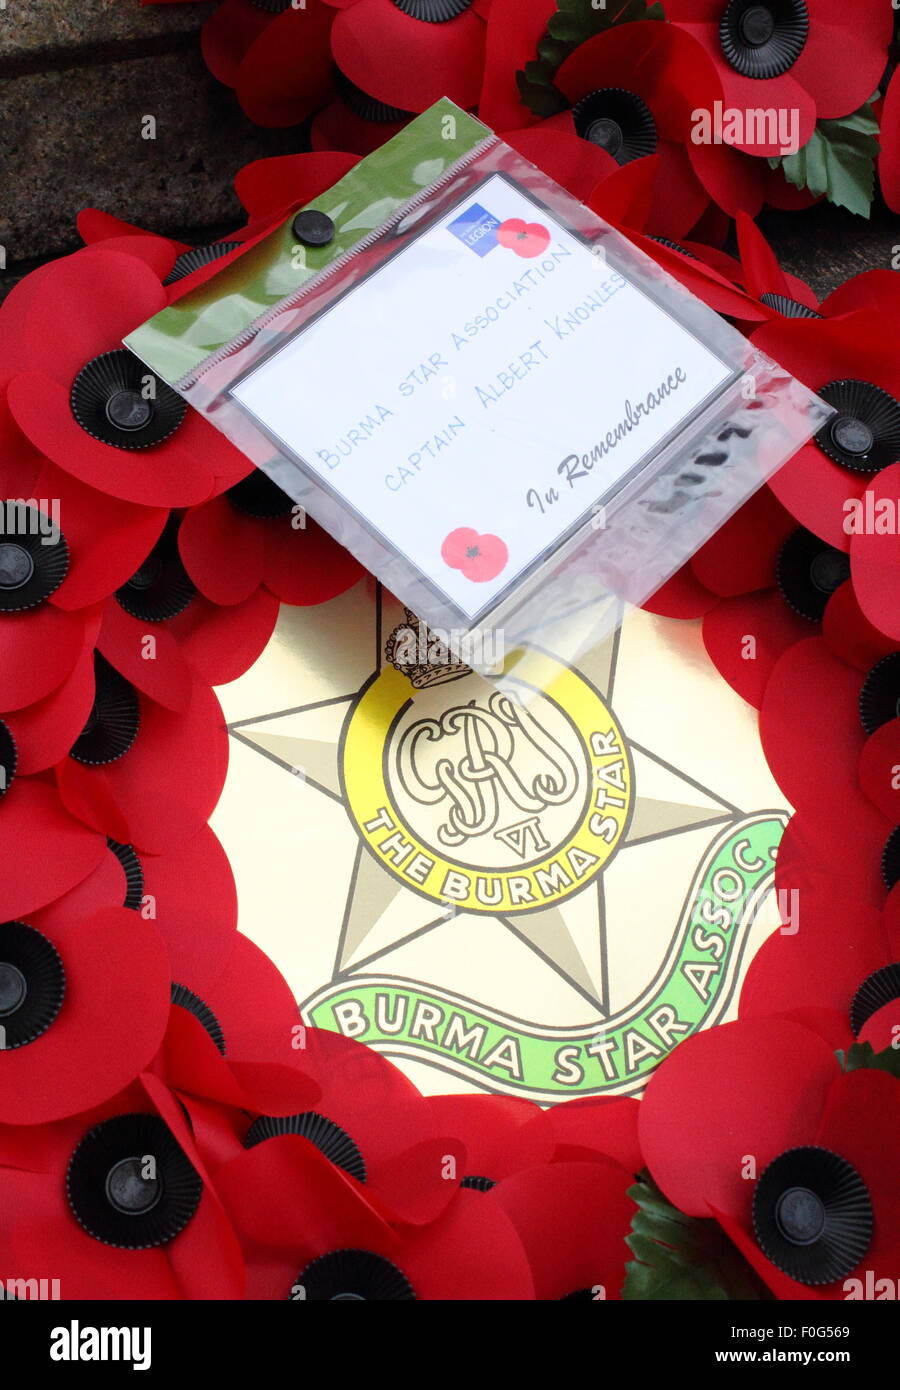 Hayfield, High Peak, Derbyshire, UK. 15 August 2015. A 'Burma Star Association' wreath laid at Hayfield War Memorial during a Royal British Legion servic to mark the 70th anniversary of Victory over Japan. Credit:  Matthew Taylor/Alamy Live News Stock Photo